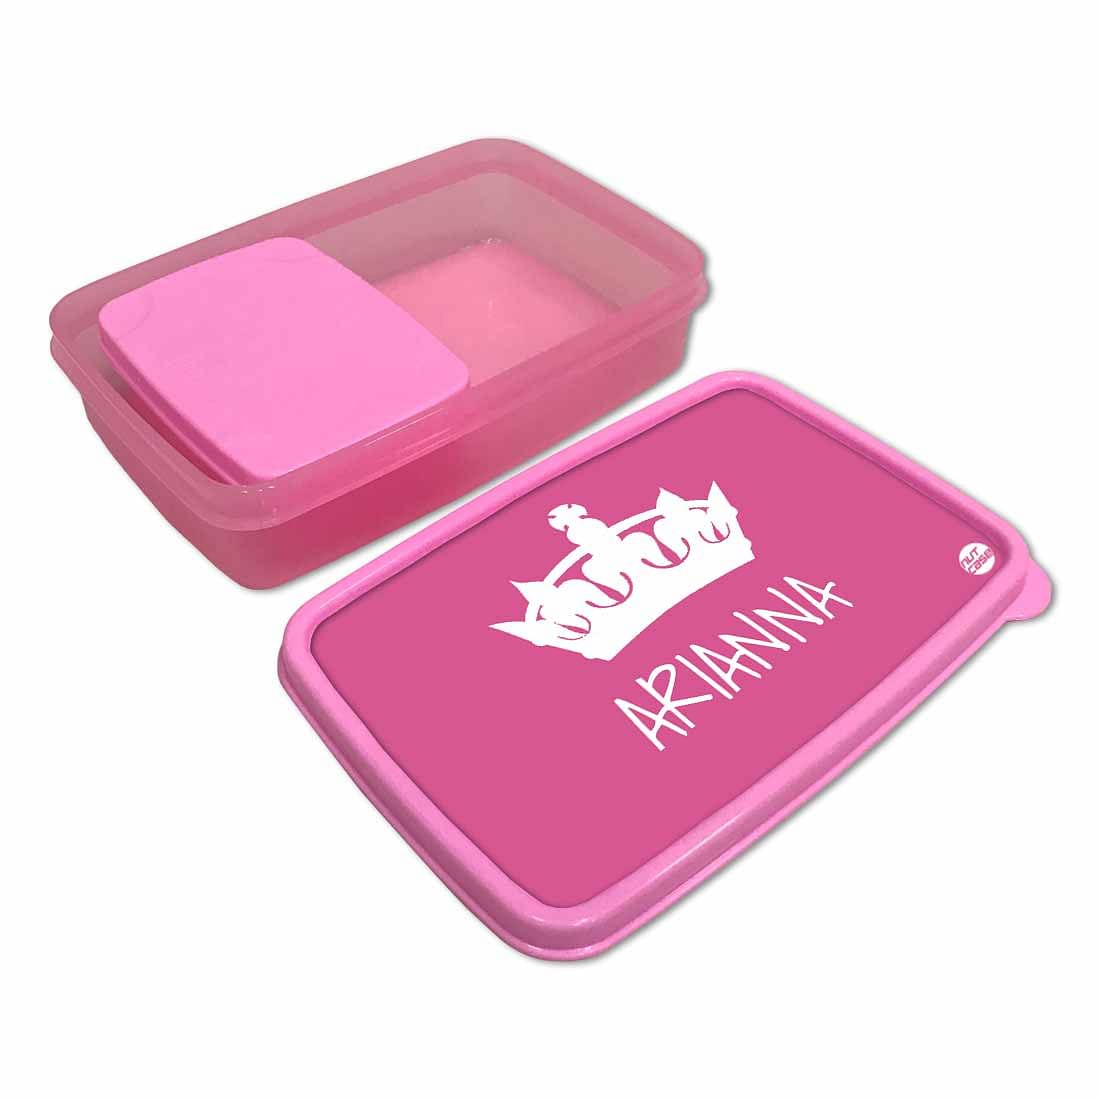 Personalized Snack Box for Kids Plastic Lunch Box for Girls - Princess Nutcase